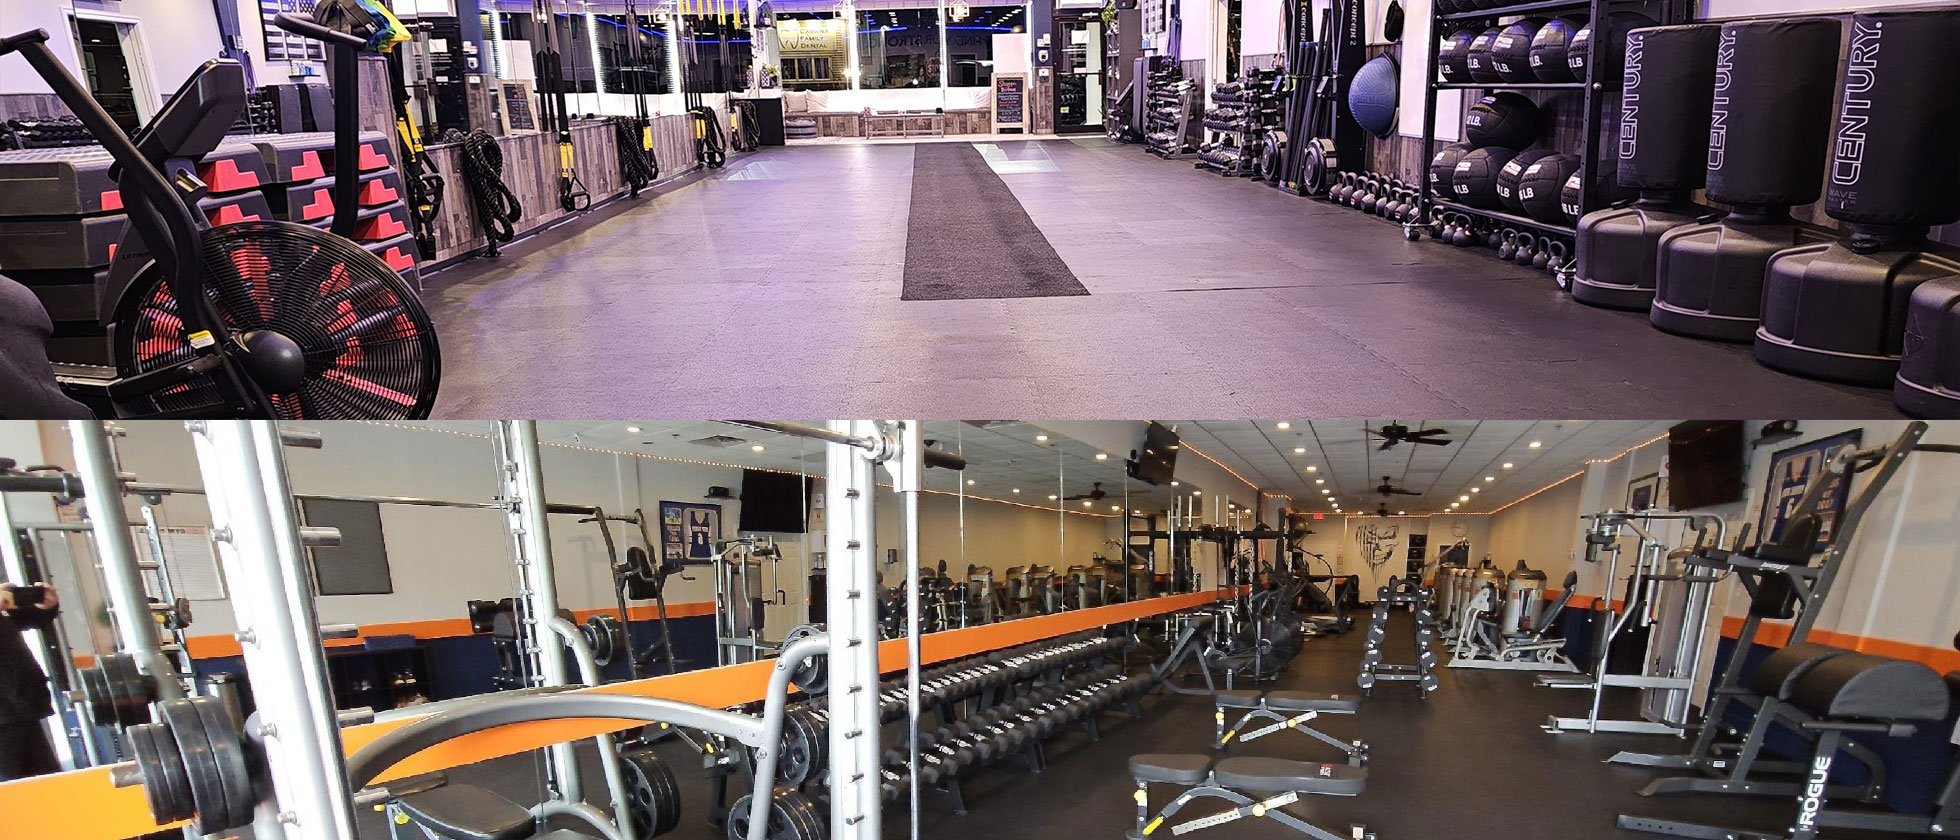 Why The Body Shoppe Is Ranked One of the Best Fitness Studios In Boonton, New Jersey